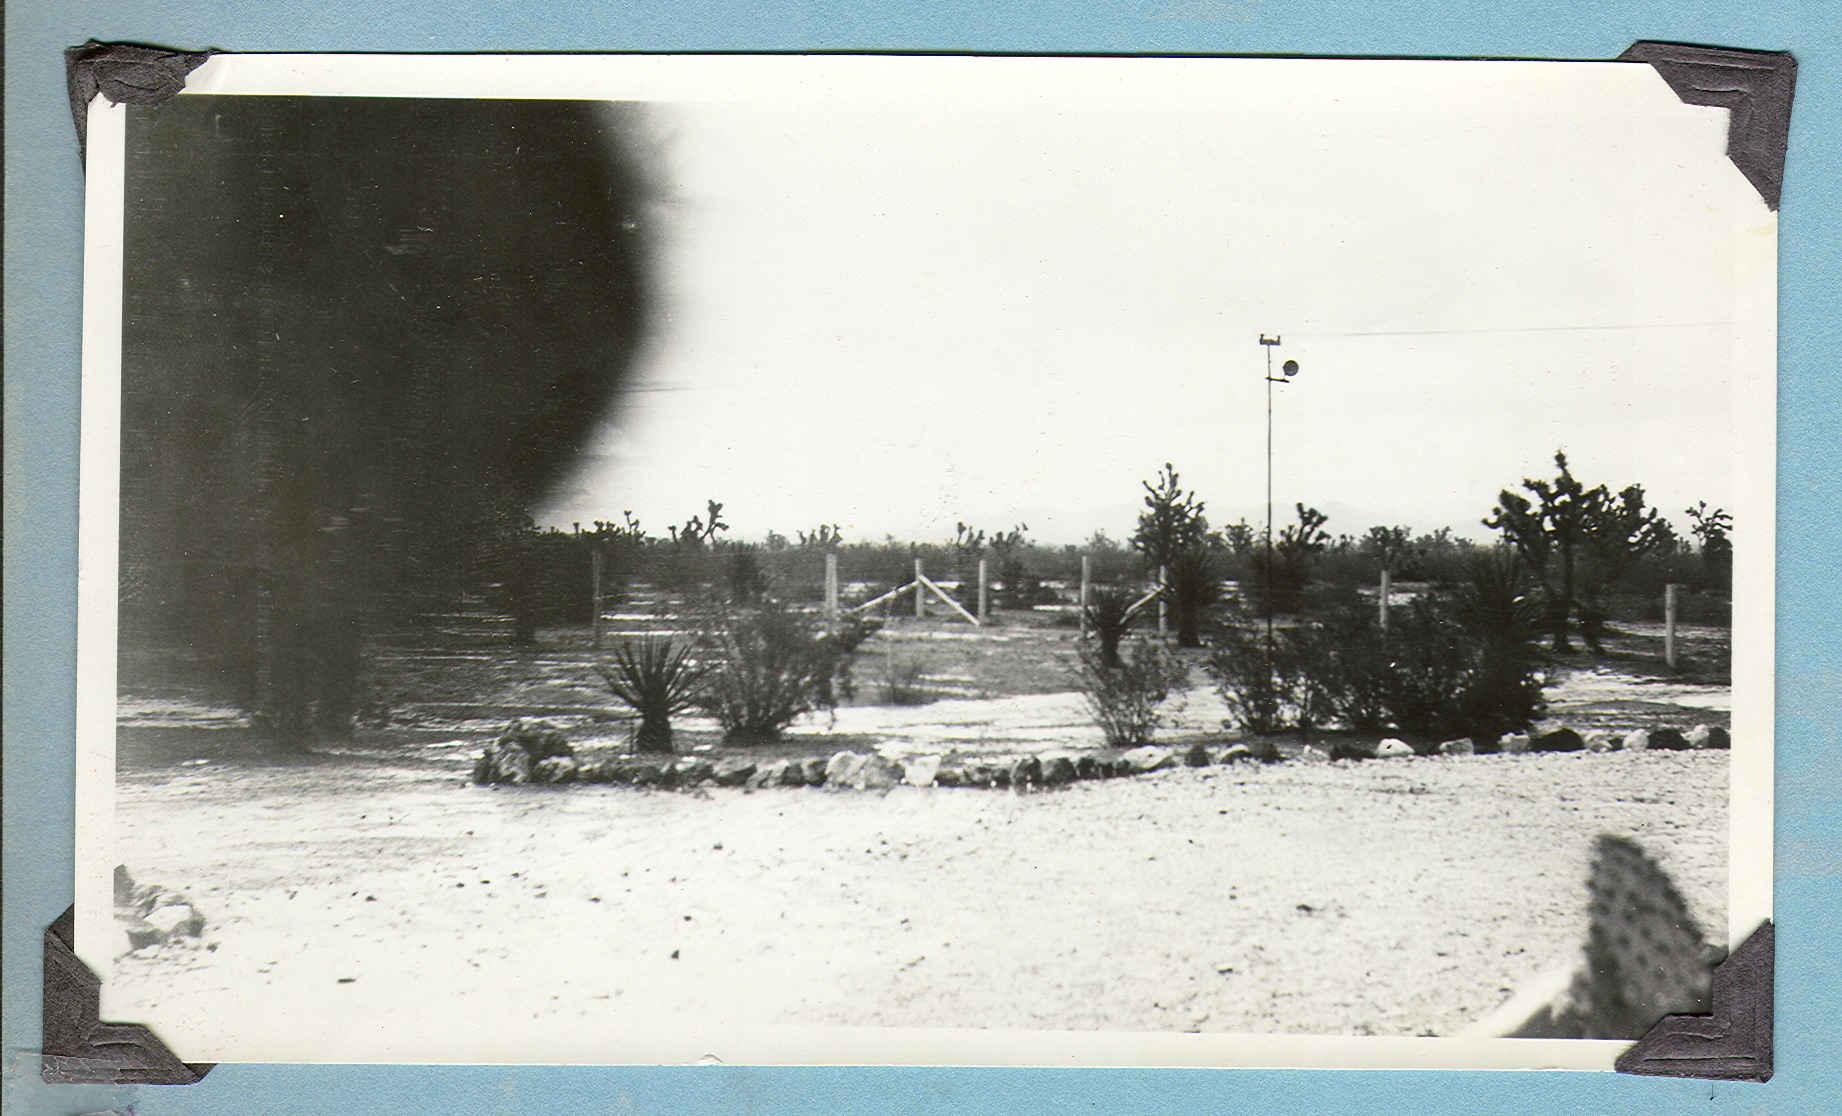 Desert scene and fencing on the ranch: photographic print